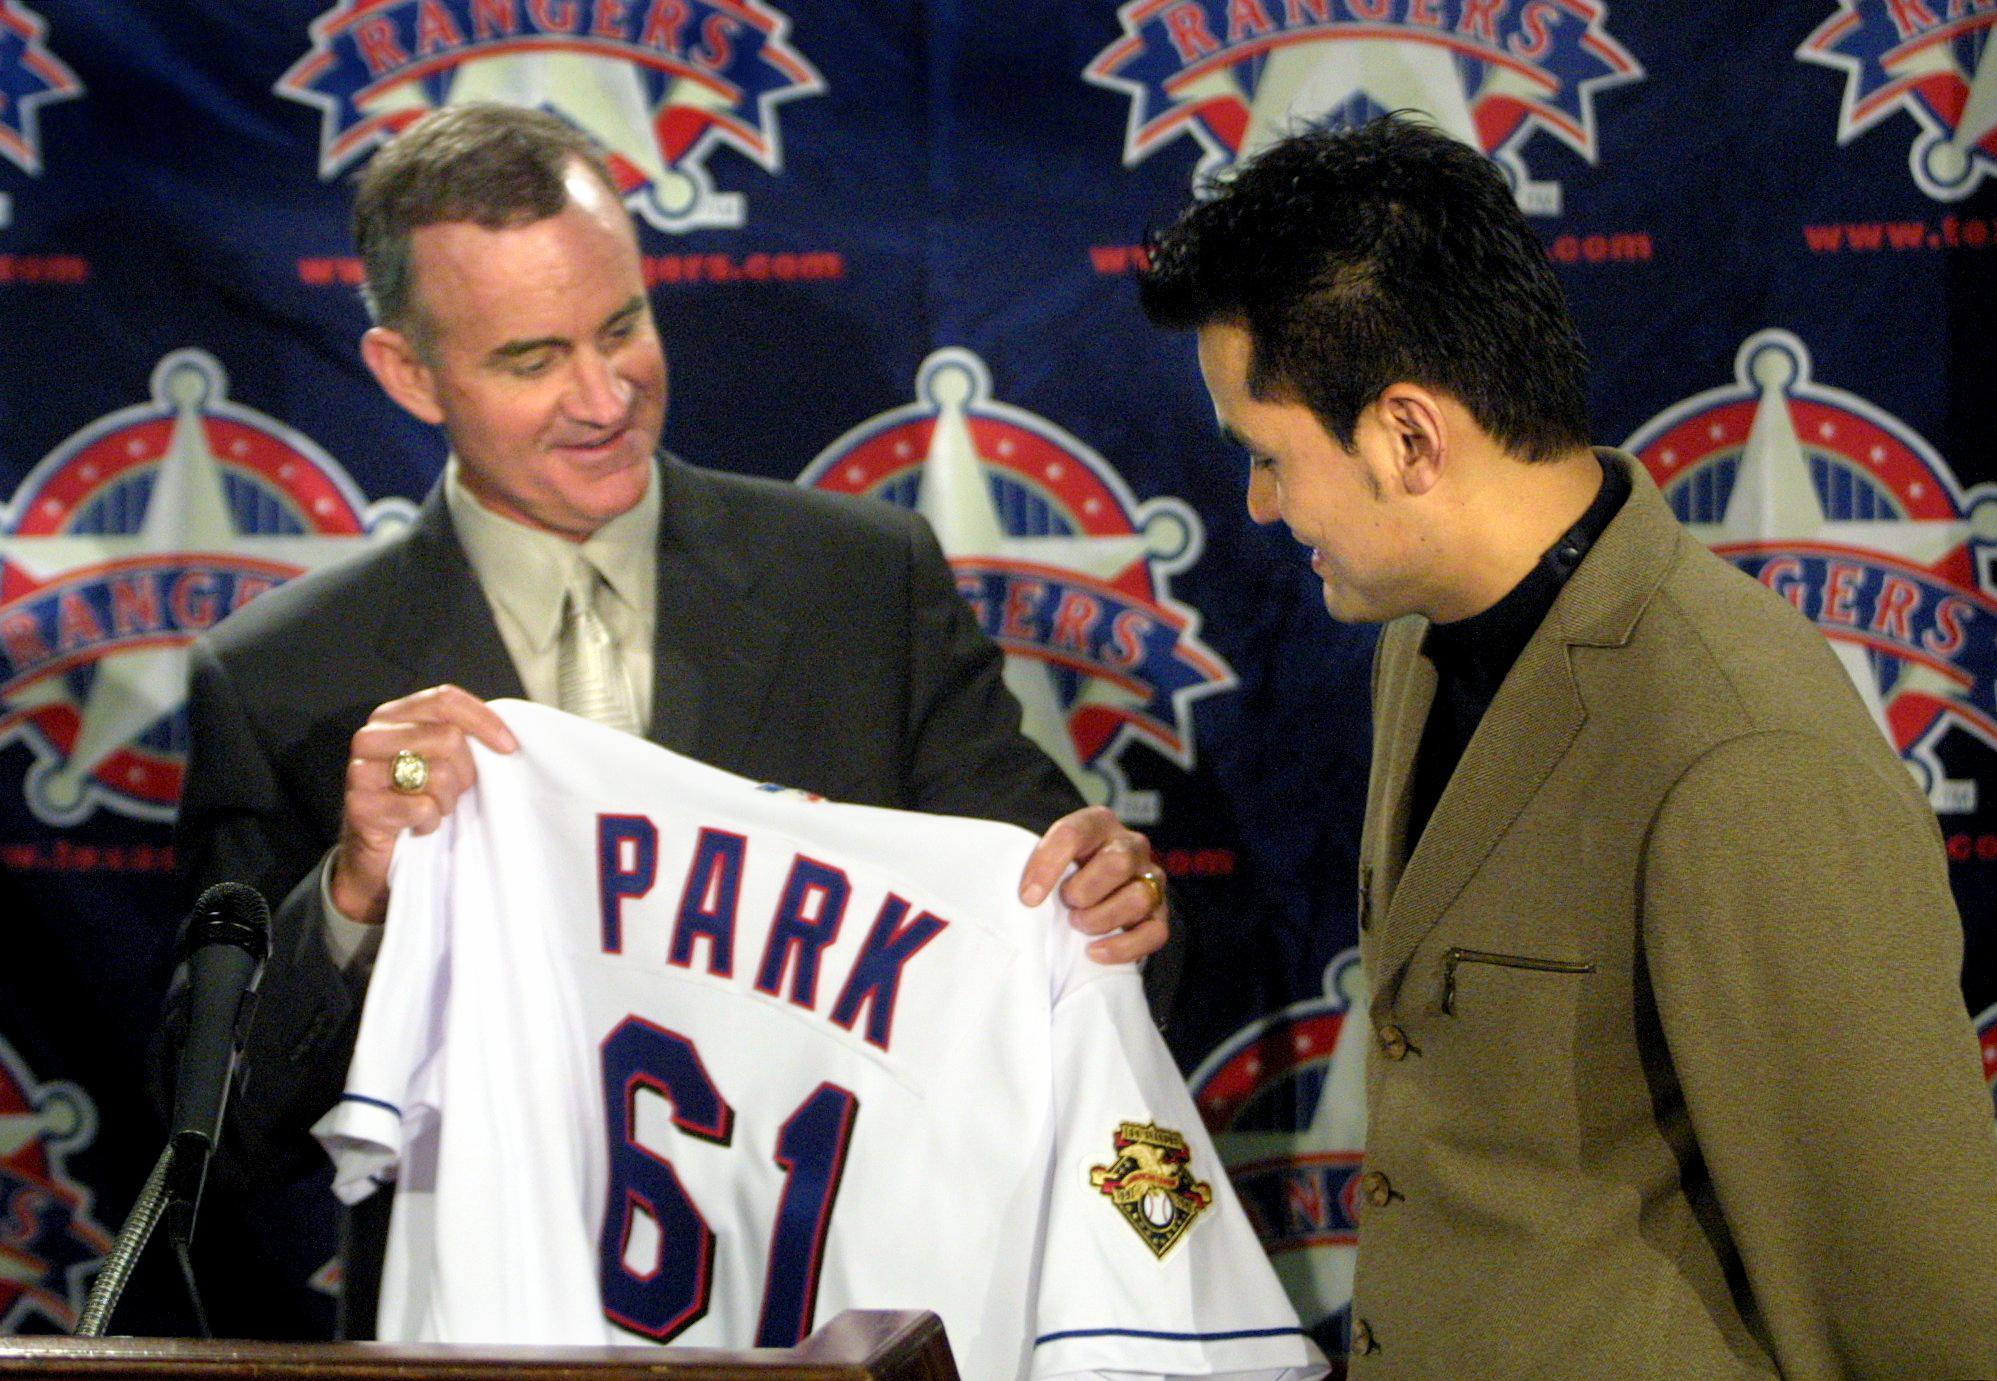 Archive: The day Chan Ho Park signed with the Rangers